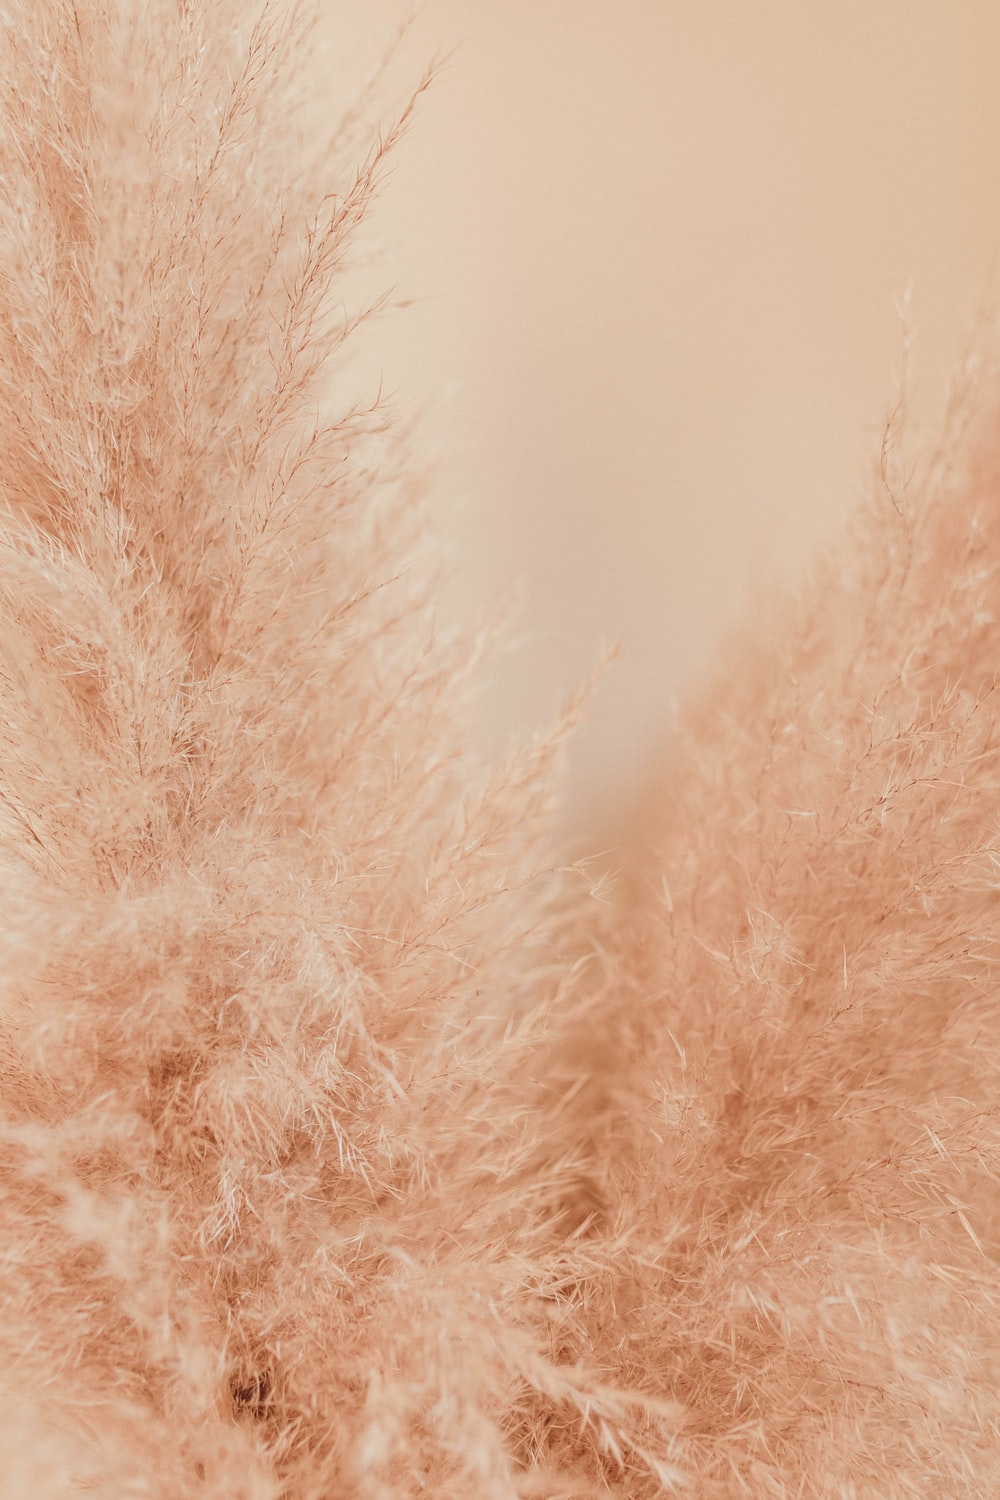 Brown Texture Picture. Download Free Image